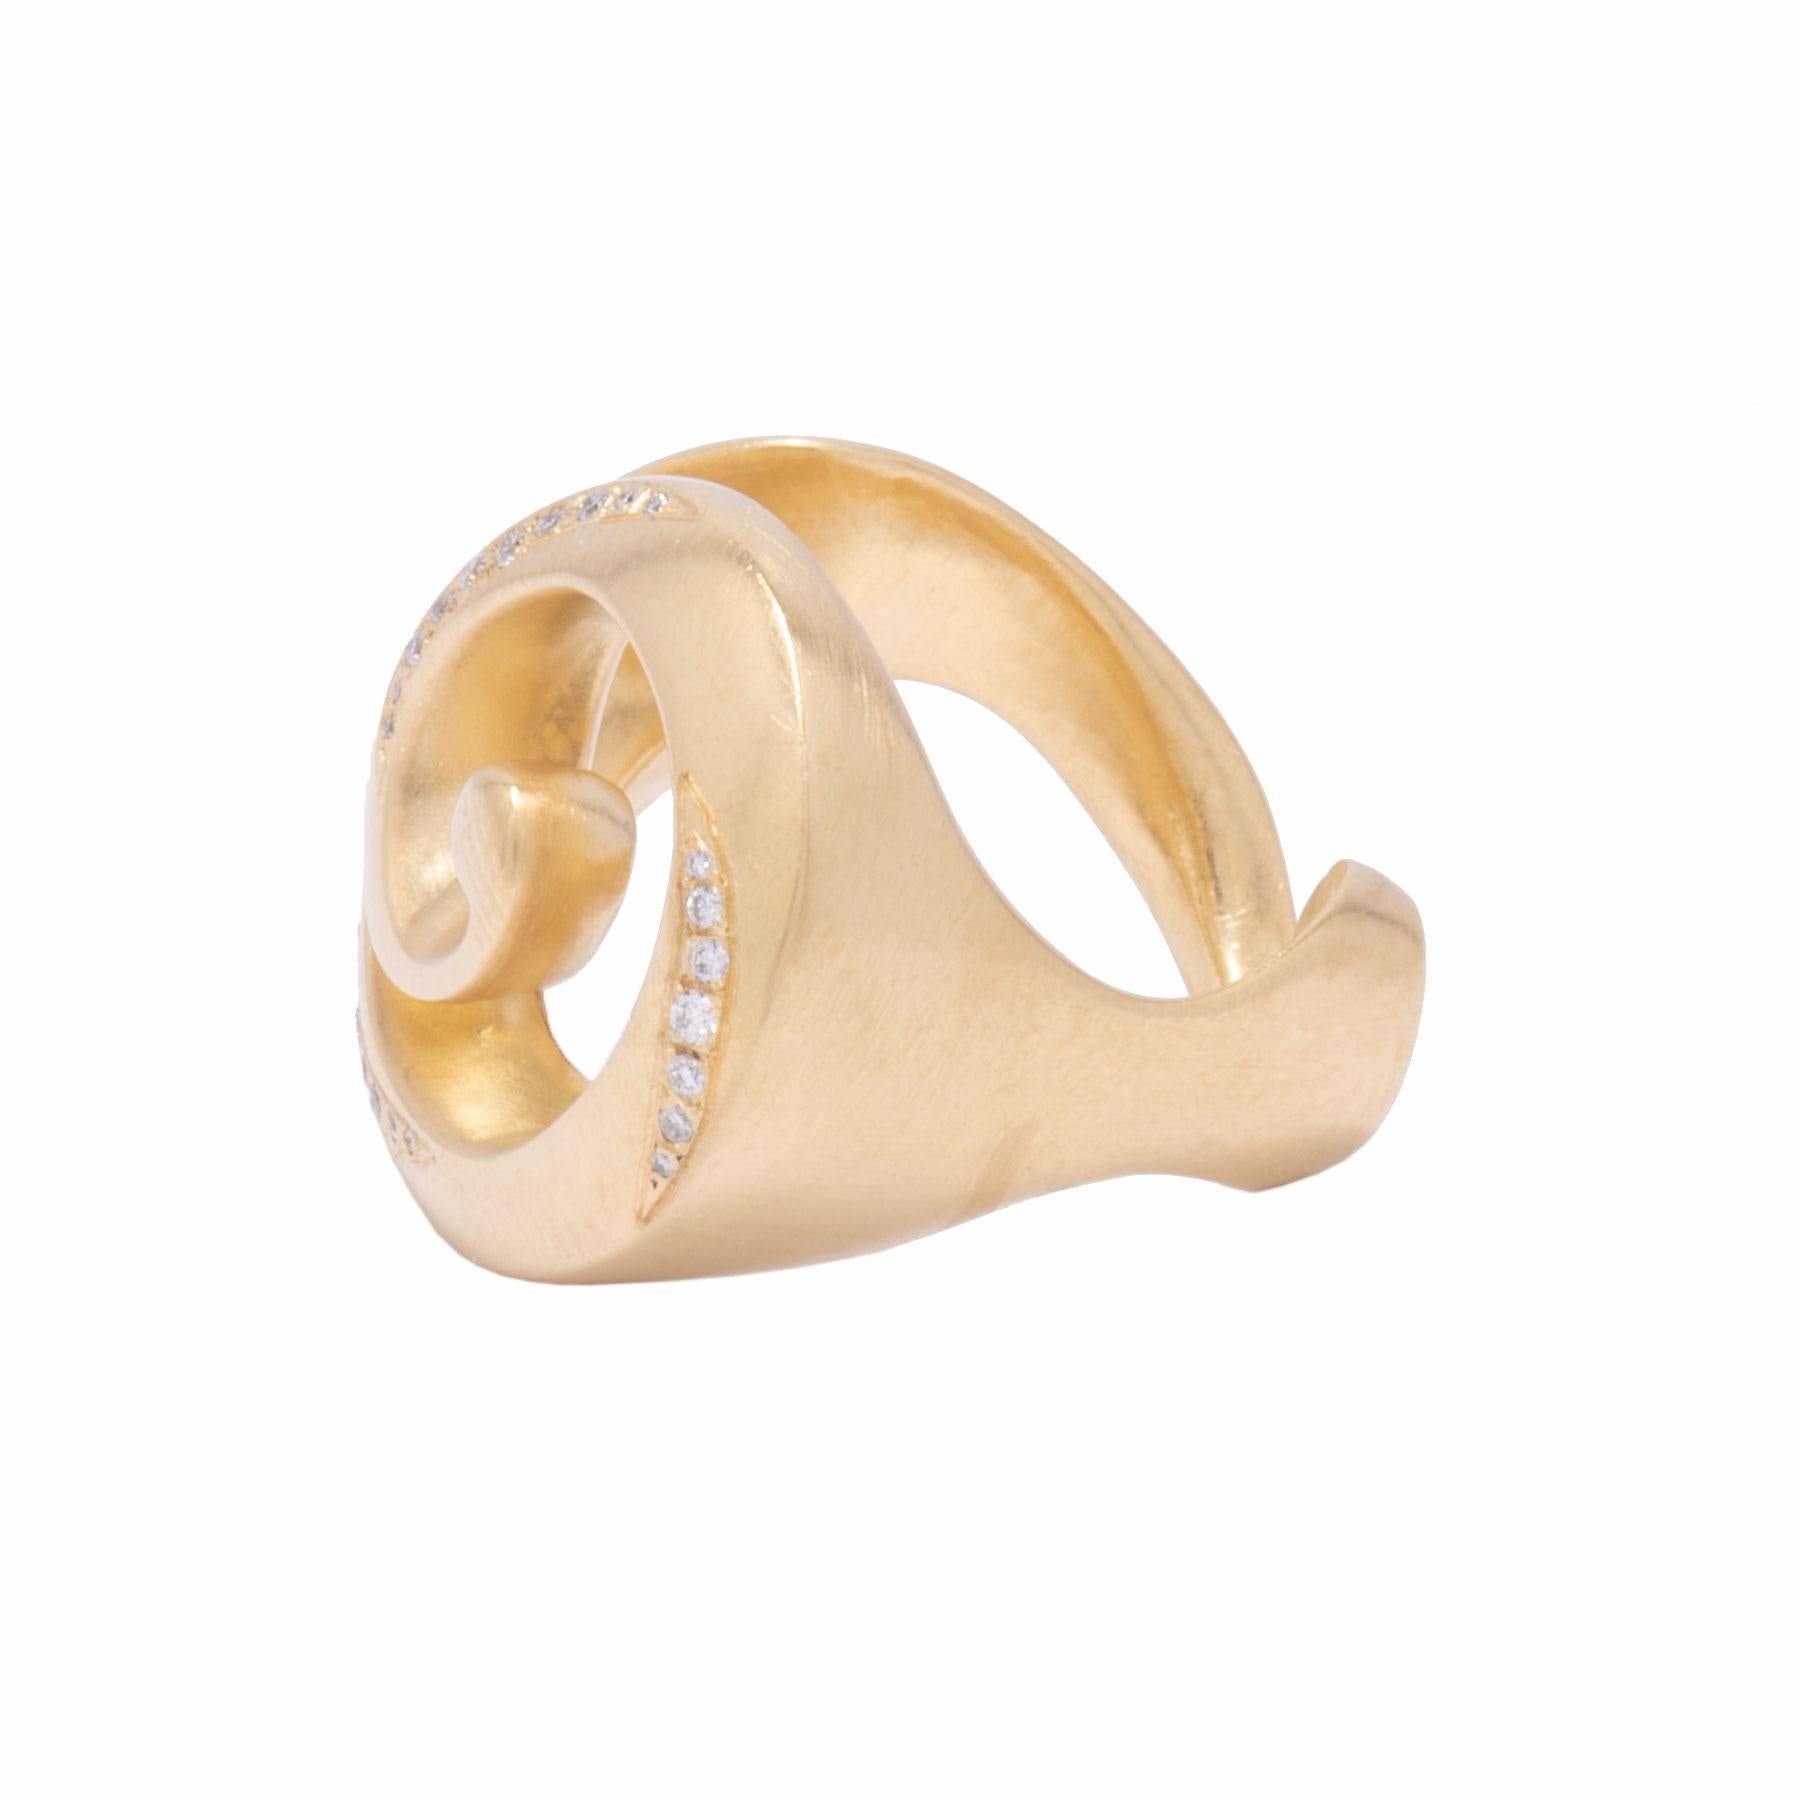 A perfectly sculpted swirl of 18 karat gold like a broken conch shell weathered from sand and seas is dusted with .48 tcw pave diamonds as remnants of sand. This hand carved Broken Shell Ring in 18 karat gold was crafted in our studio. While it is